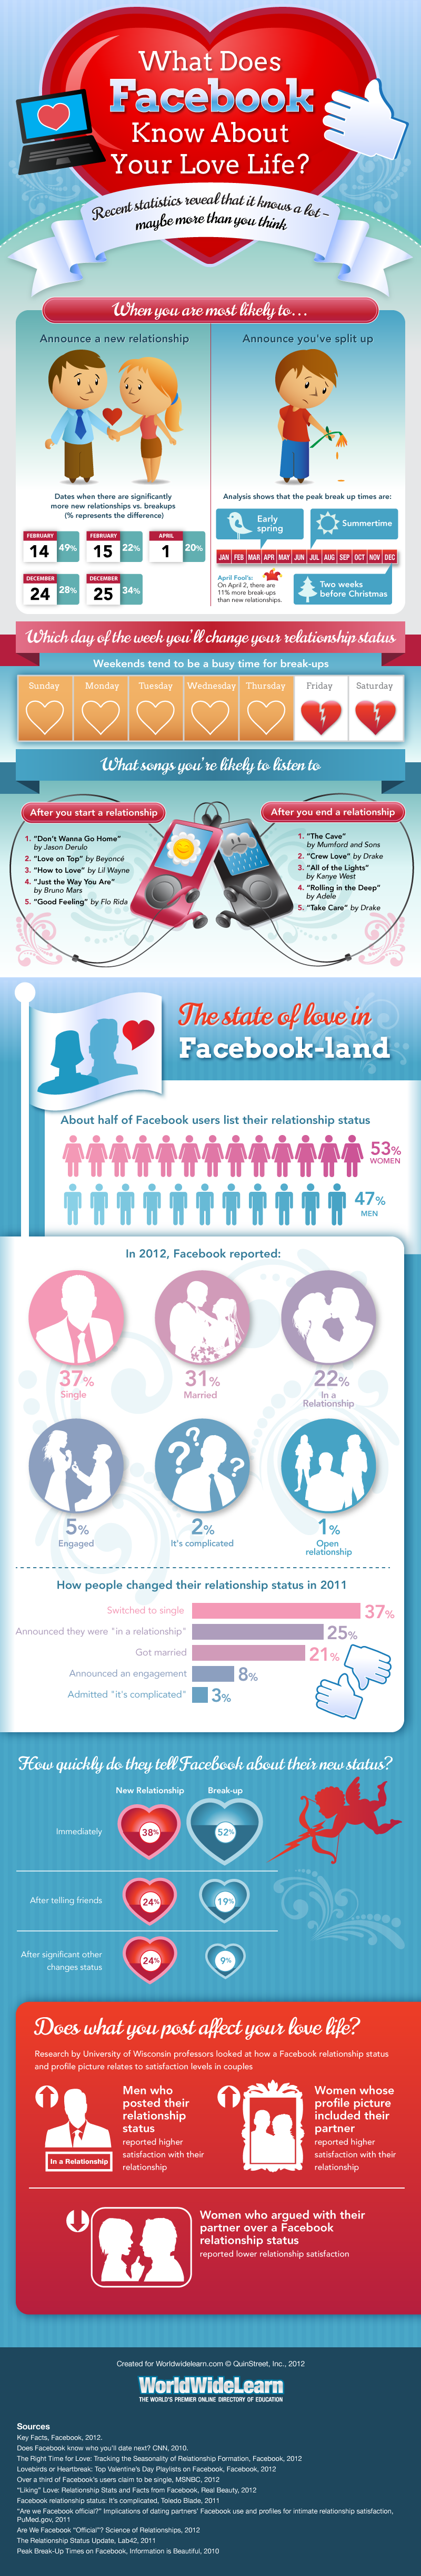 What Does Facebook Know About Your Love Life?